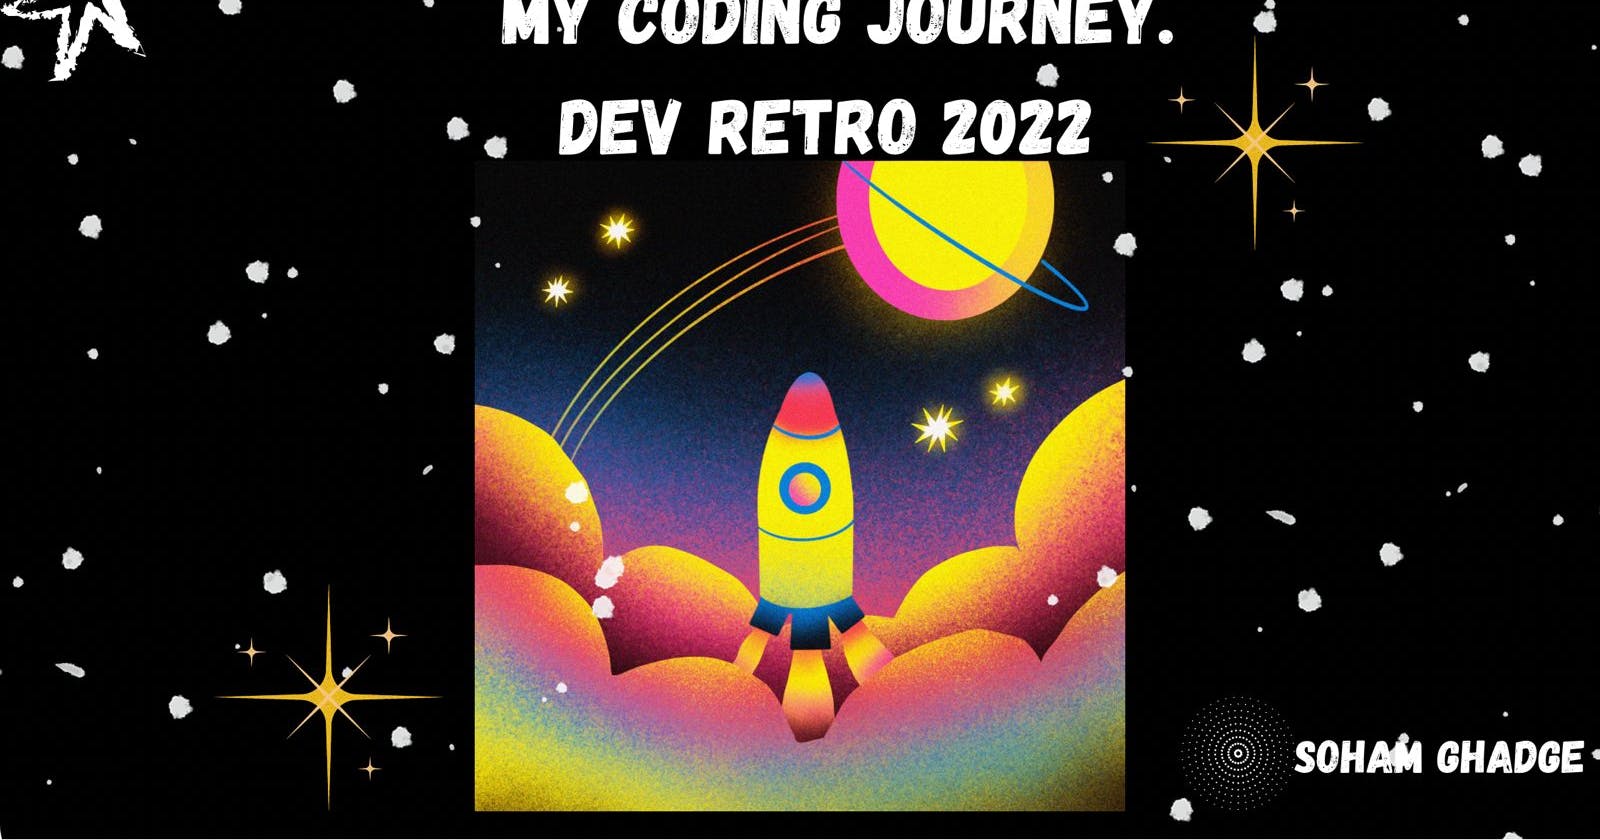 From Enthusiast to Coder- My coding journey. Dev Retro 2022